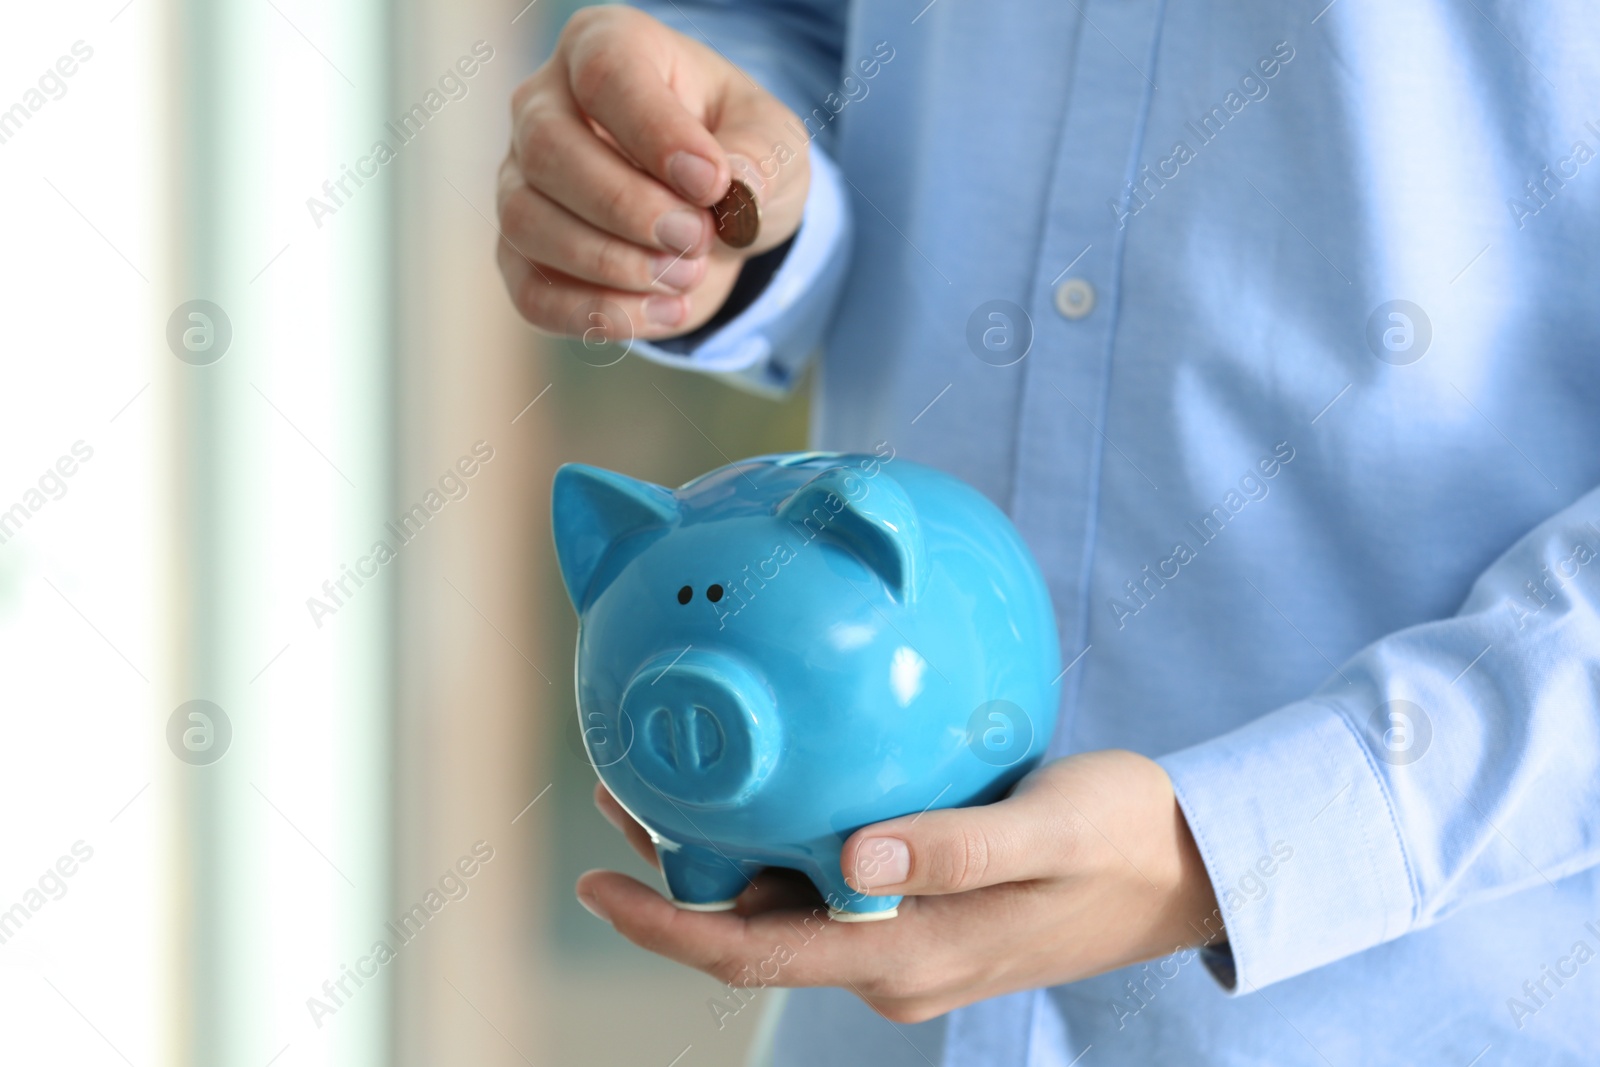 Photo of Man putting coin into piggy bank on blurred background, closeup. Money savings